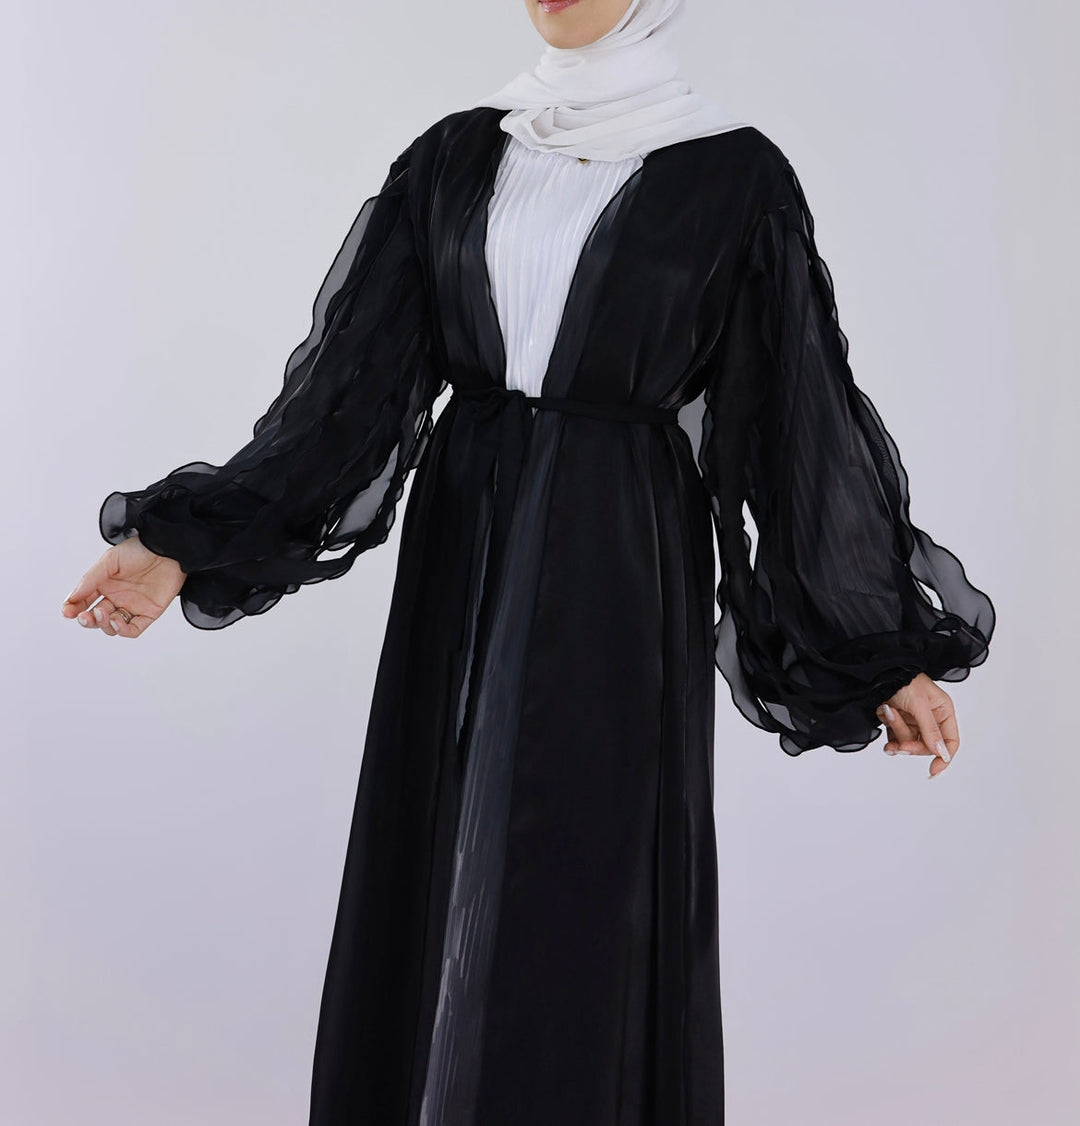 Get trendy with Bella 2-Piece Abaya Set - Black - Dresses available at Voilee NY. Grab yours for $120 today!